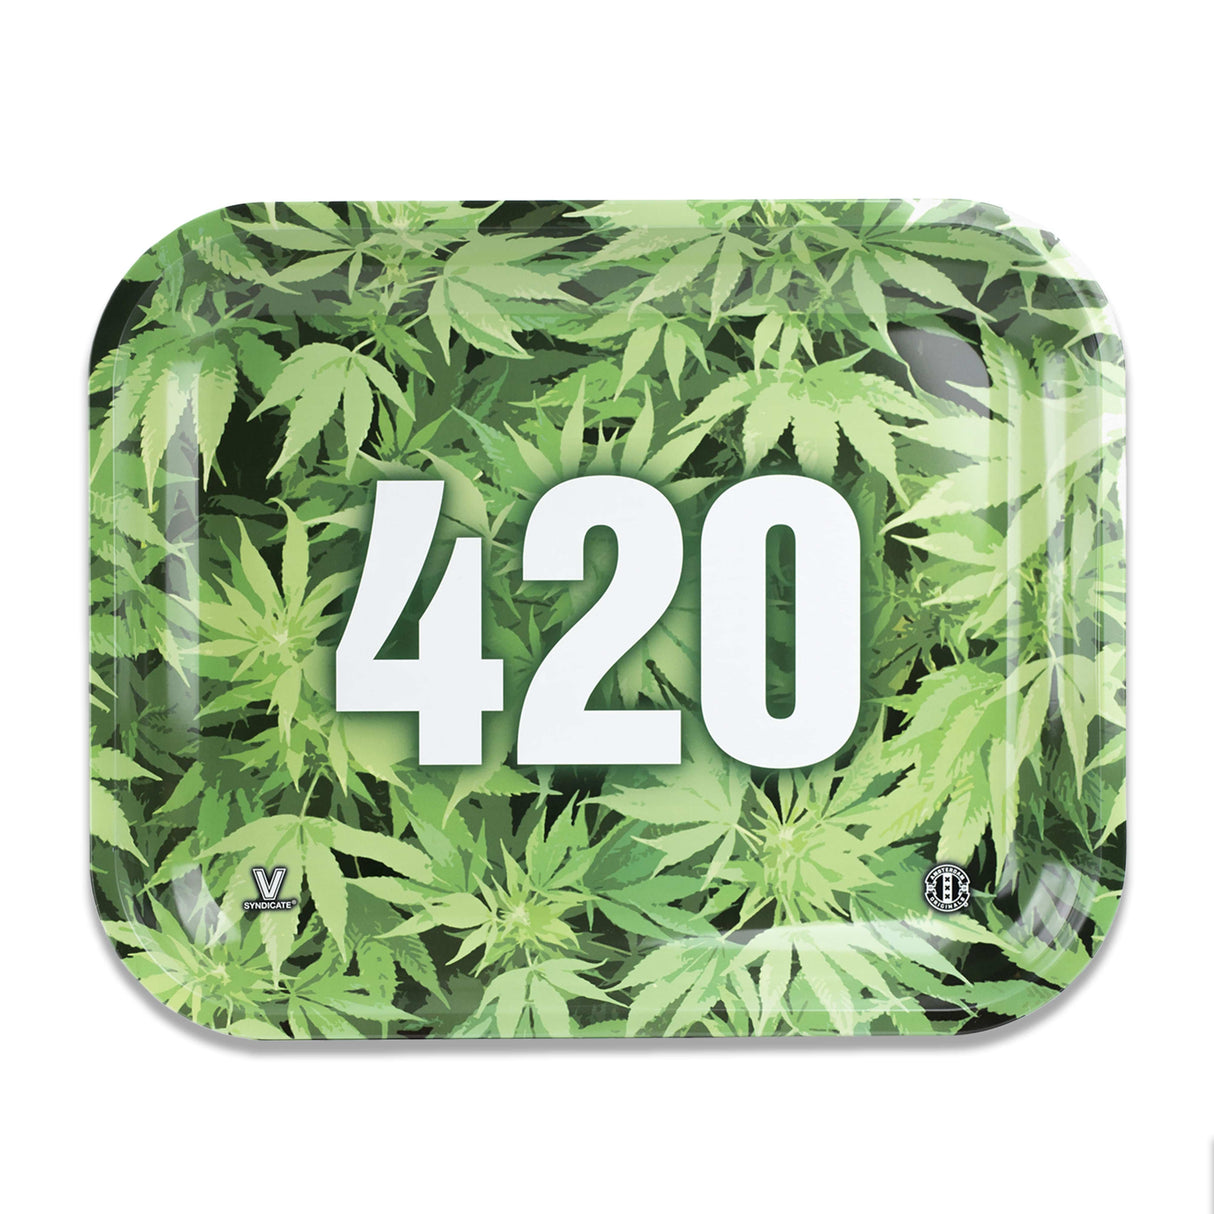 V Syndicate 420 Green Metal Rollin' Tray with cannabis leaf design - top view